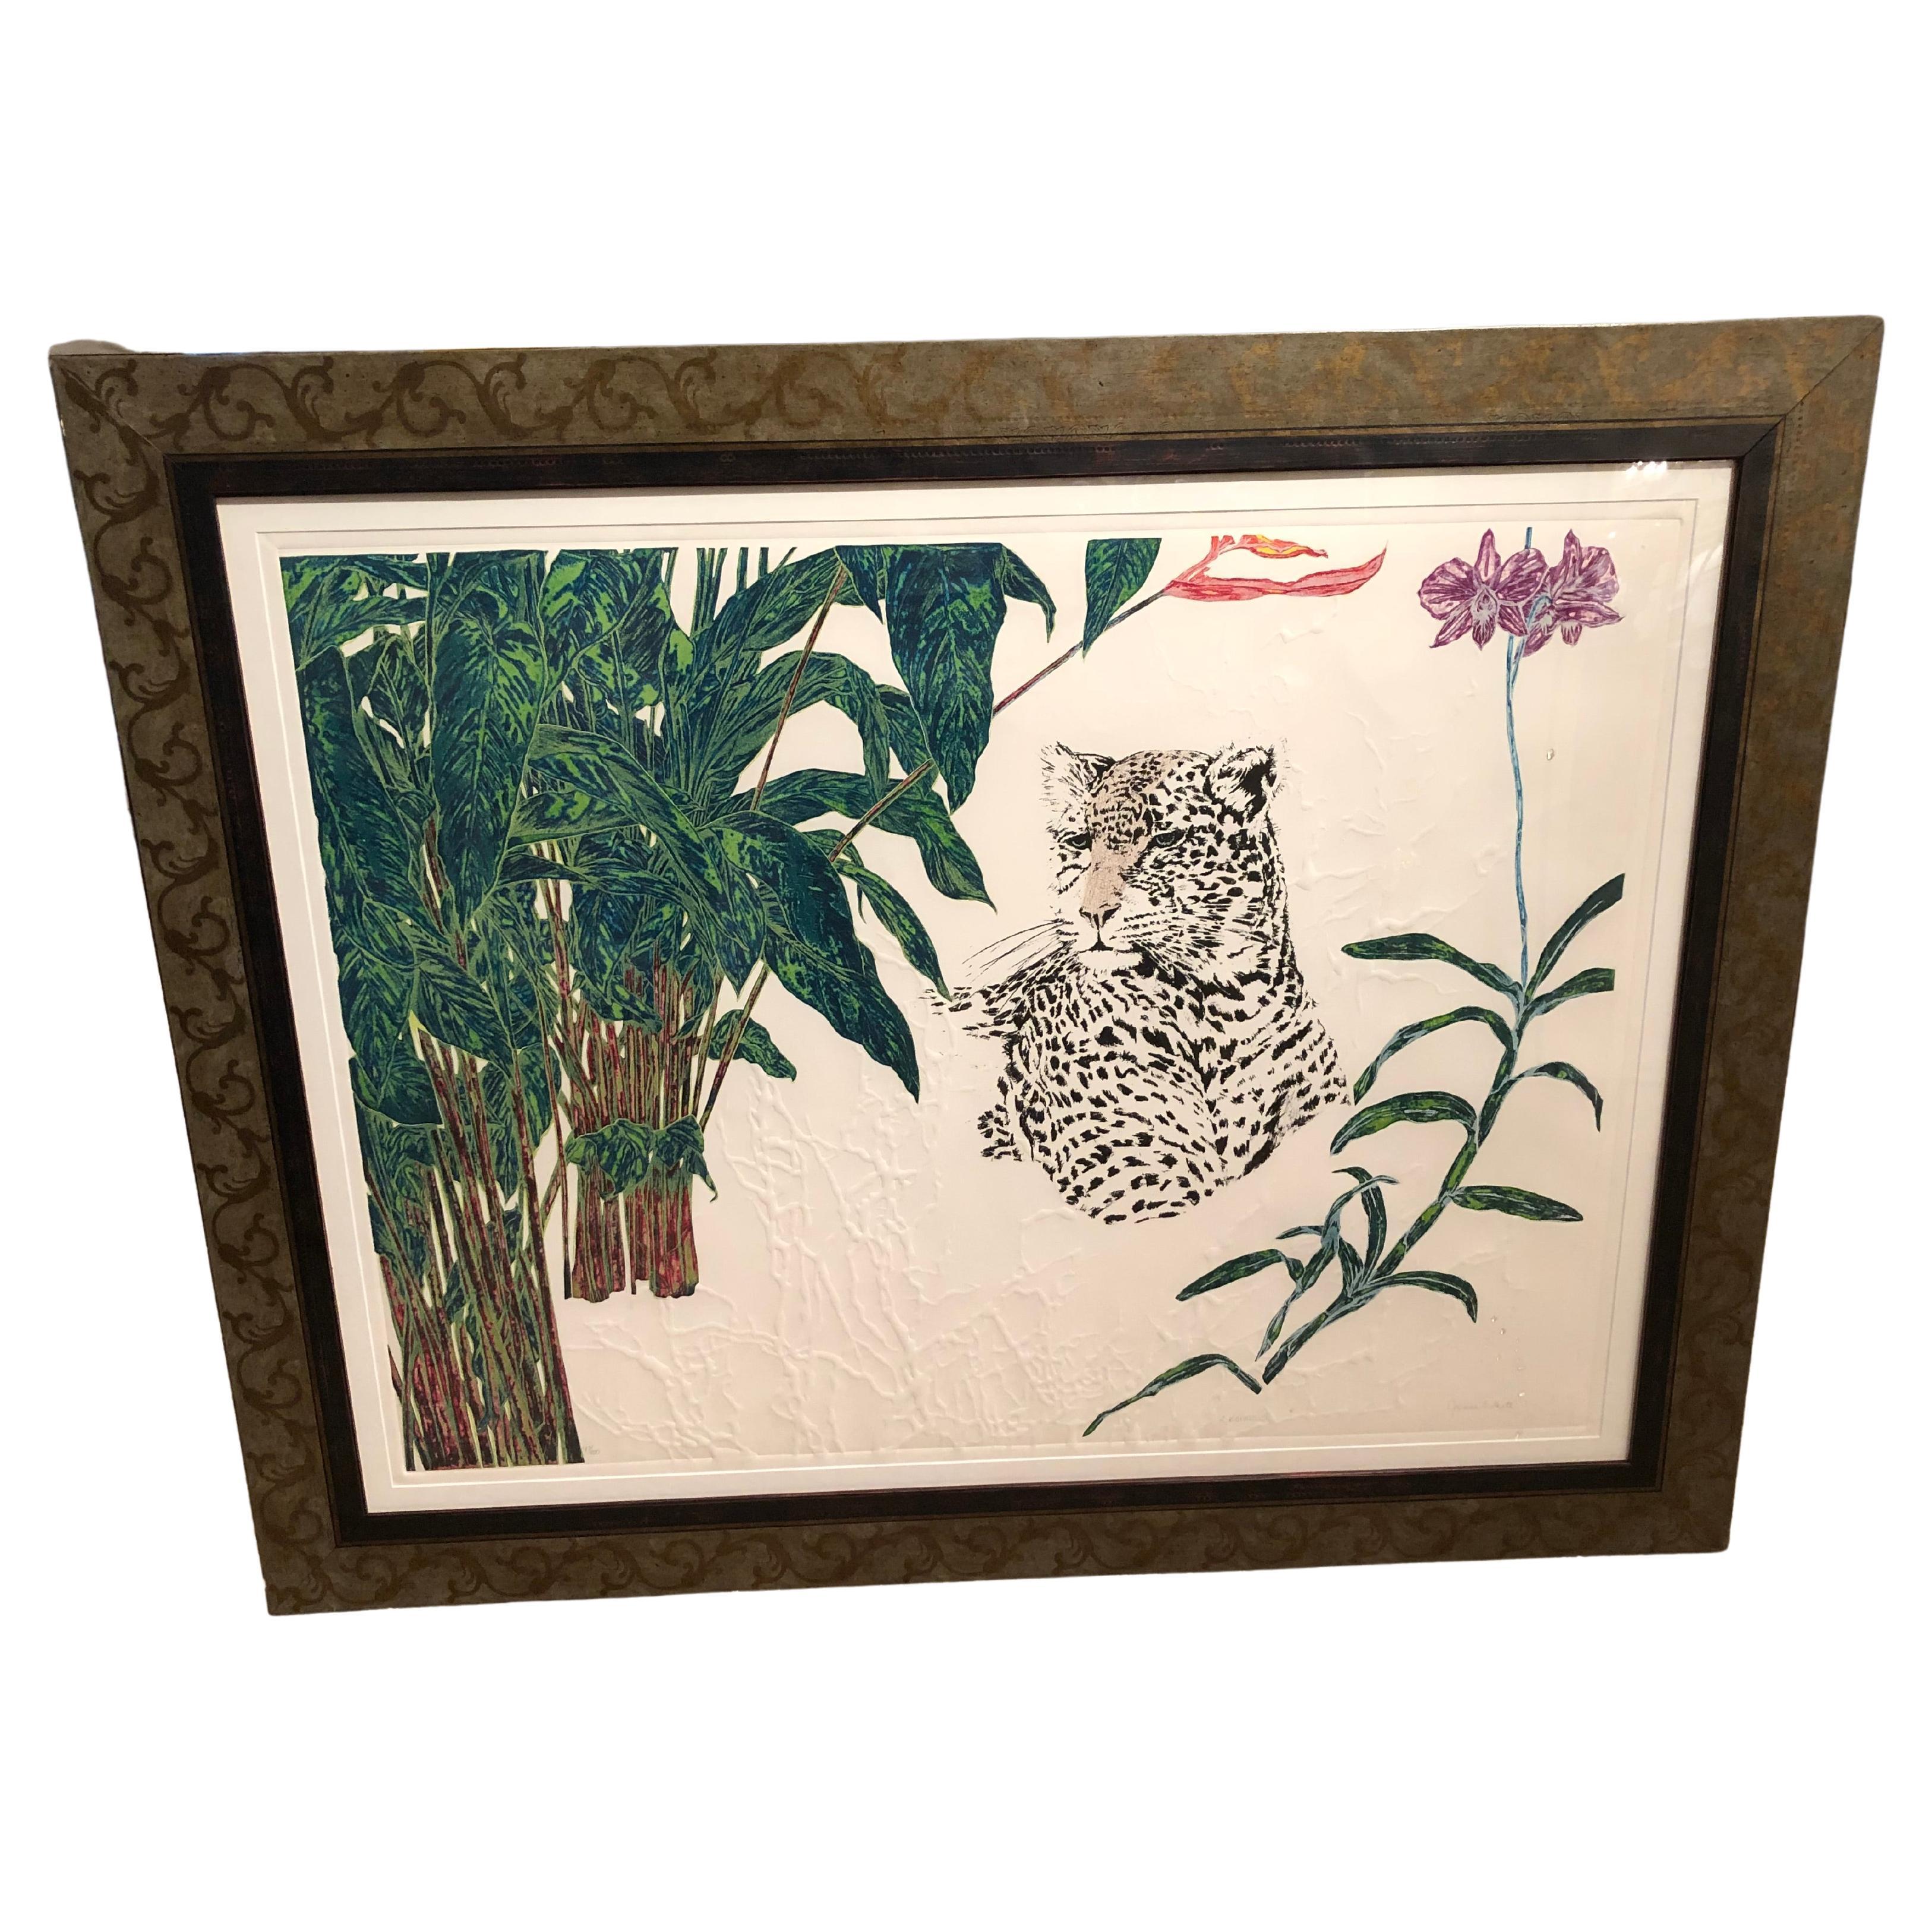 Striking Etching and Embossed Paper Art with Leopard